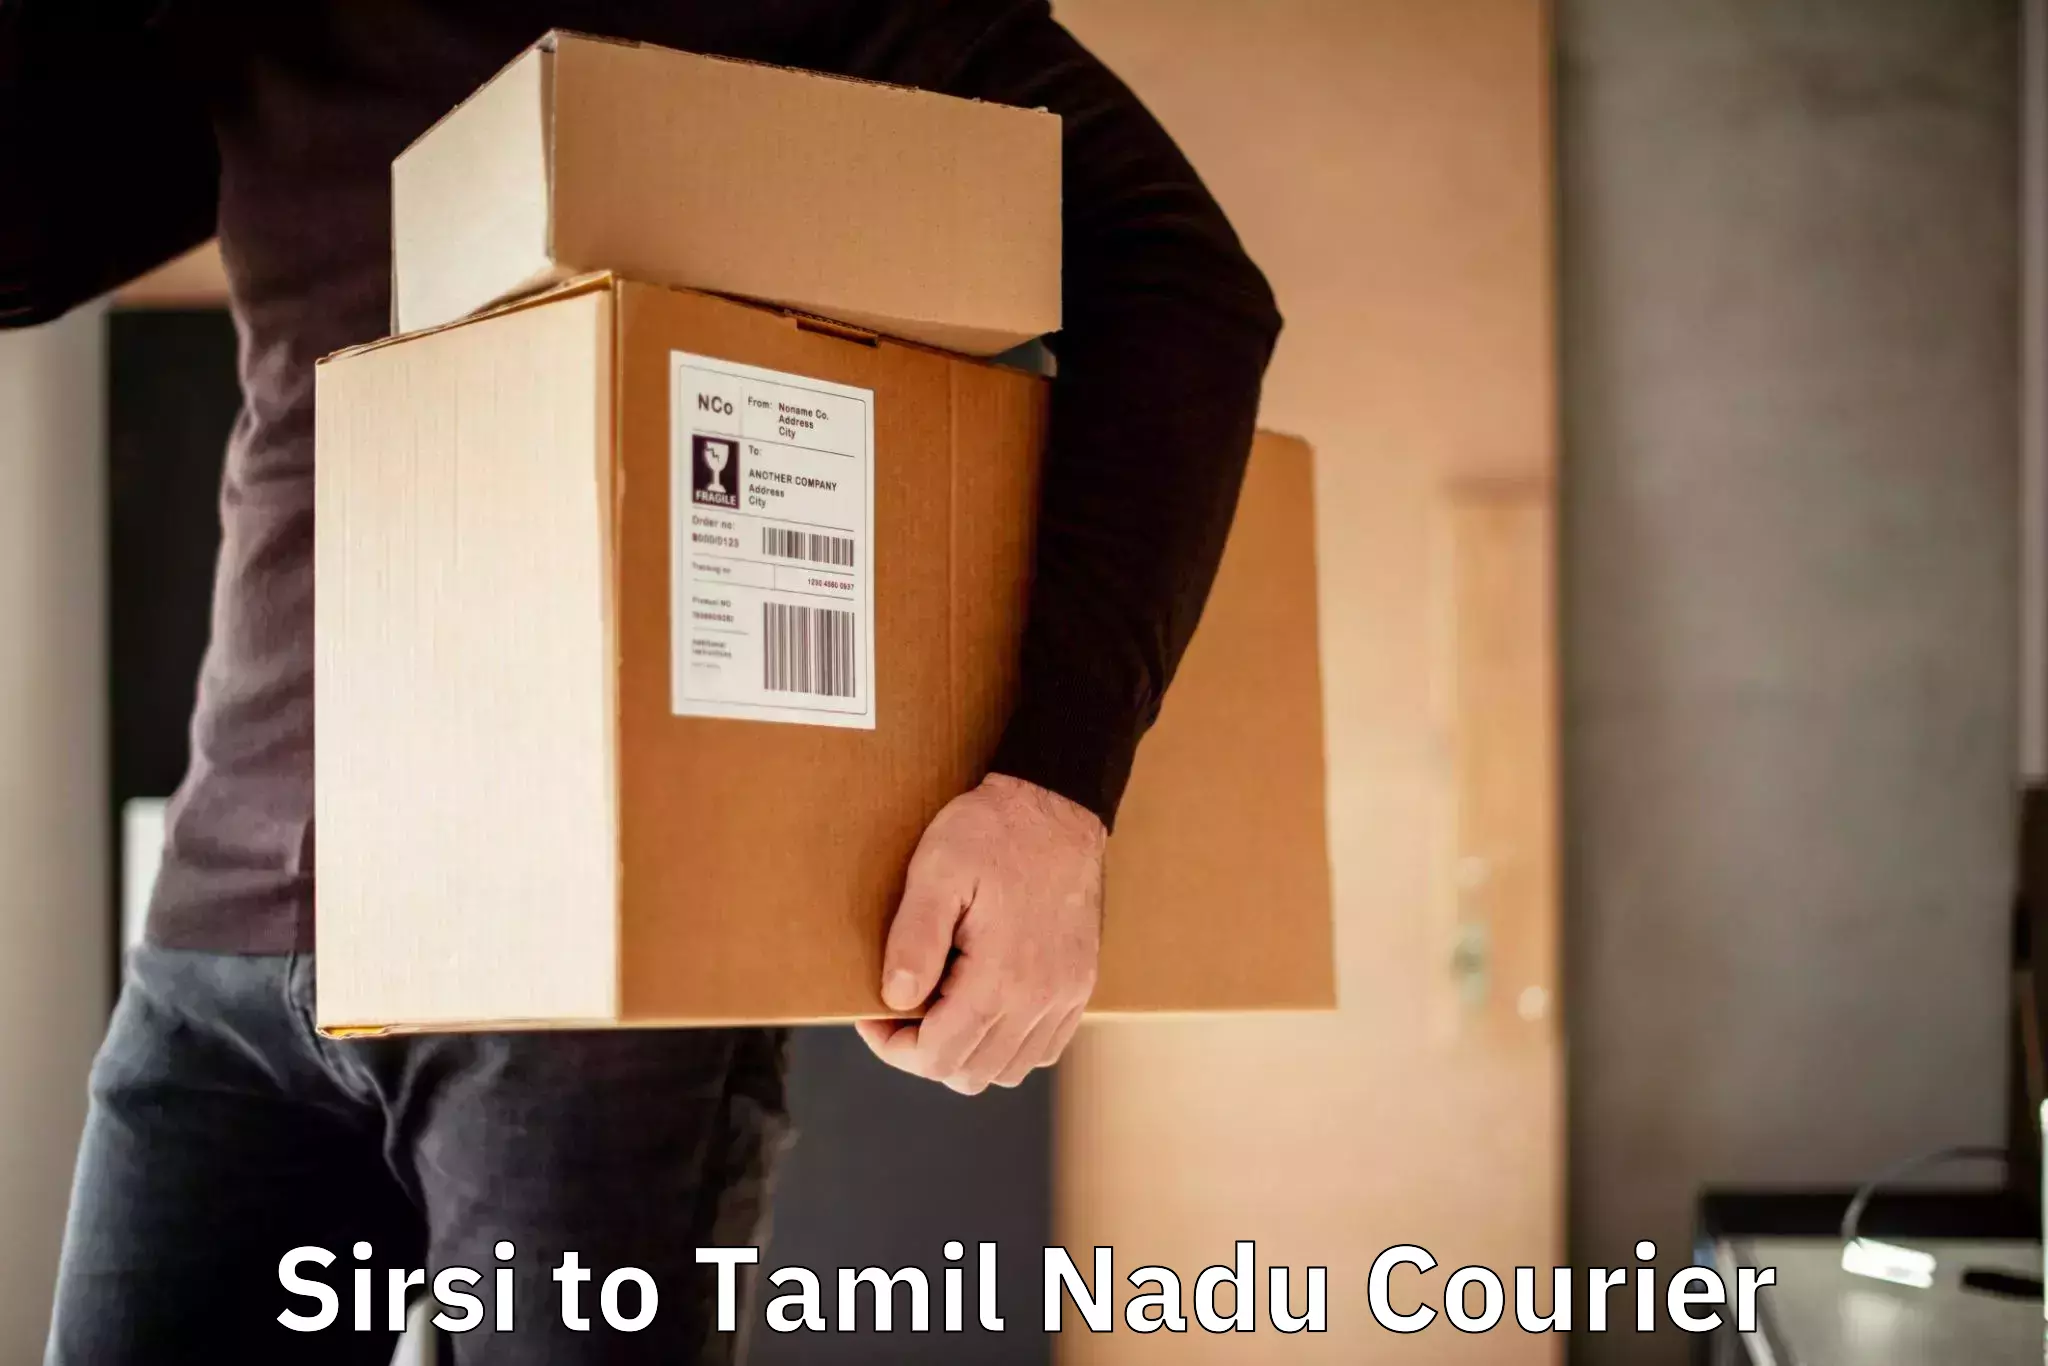 Online courier booking Sirsi to Trichy